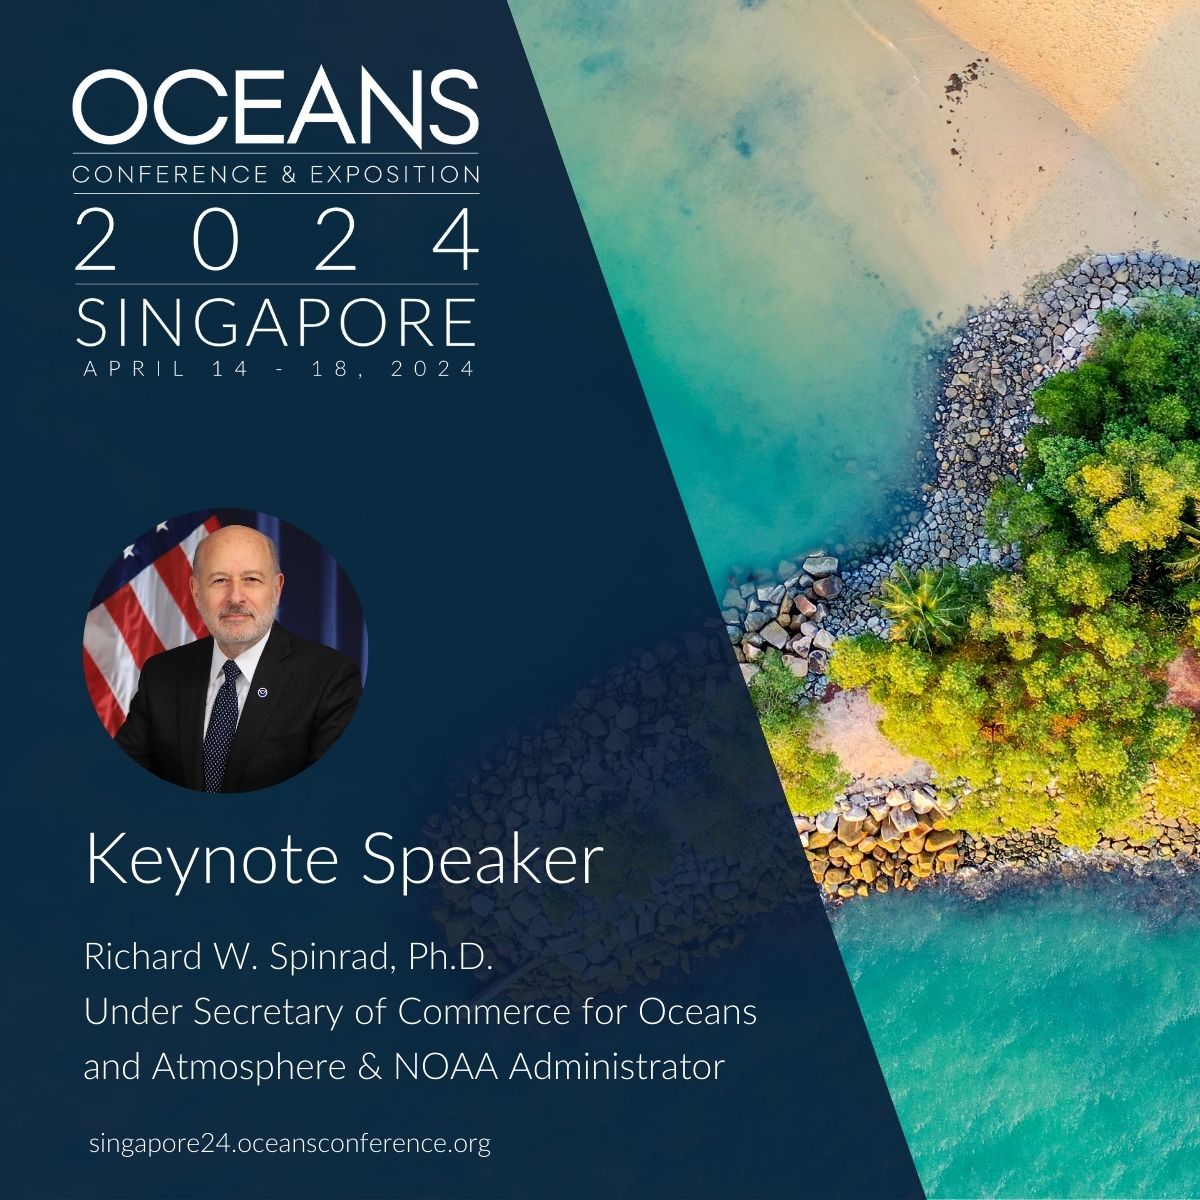 Excited to announce another keynote speaker, Richard Spinrad, PhD! Learn how NOAA is leading the charge in building resilience and sustainability. Register today! singapore24.oceansconference.org/experience/reg… #OCEANS2024Singapore #OCEANSfanatic #ClimateAction #NOAA #KeynoteSpeaker